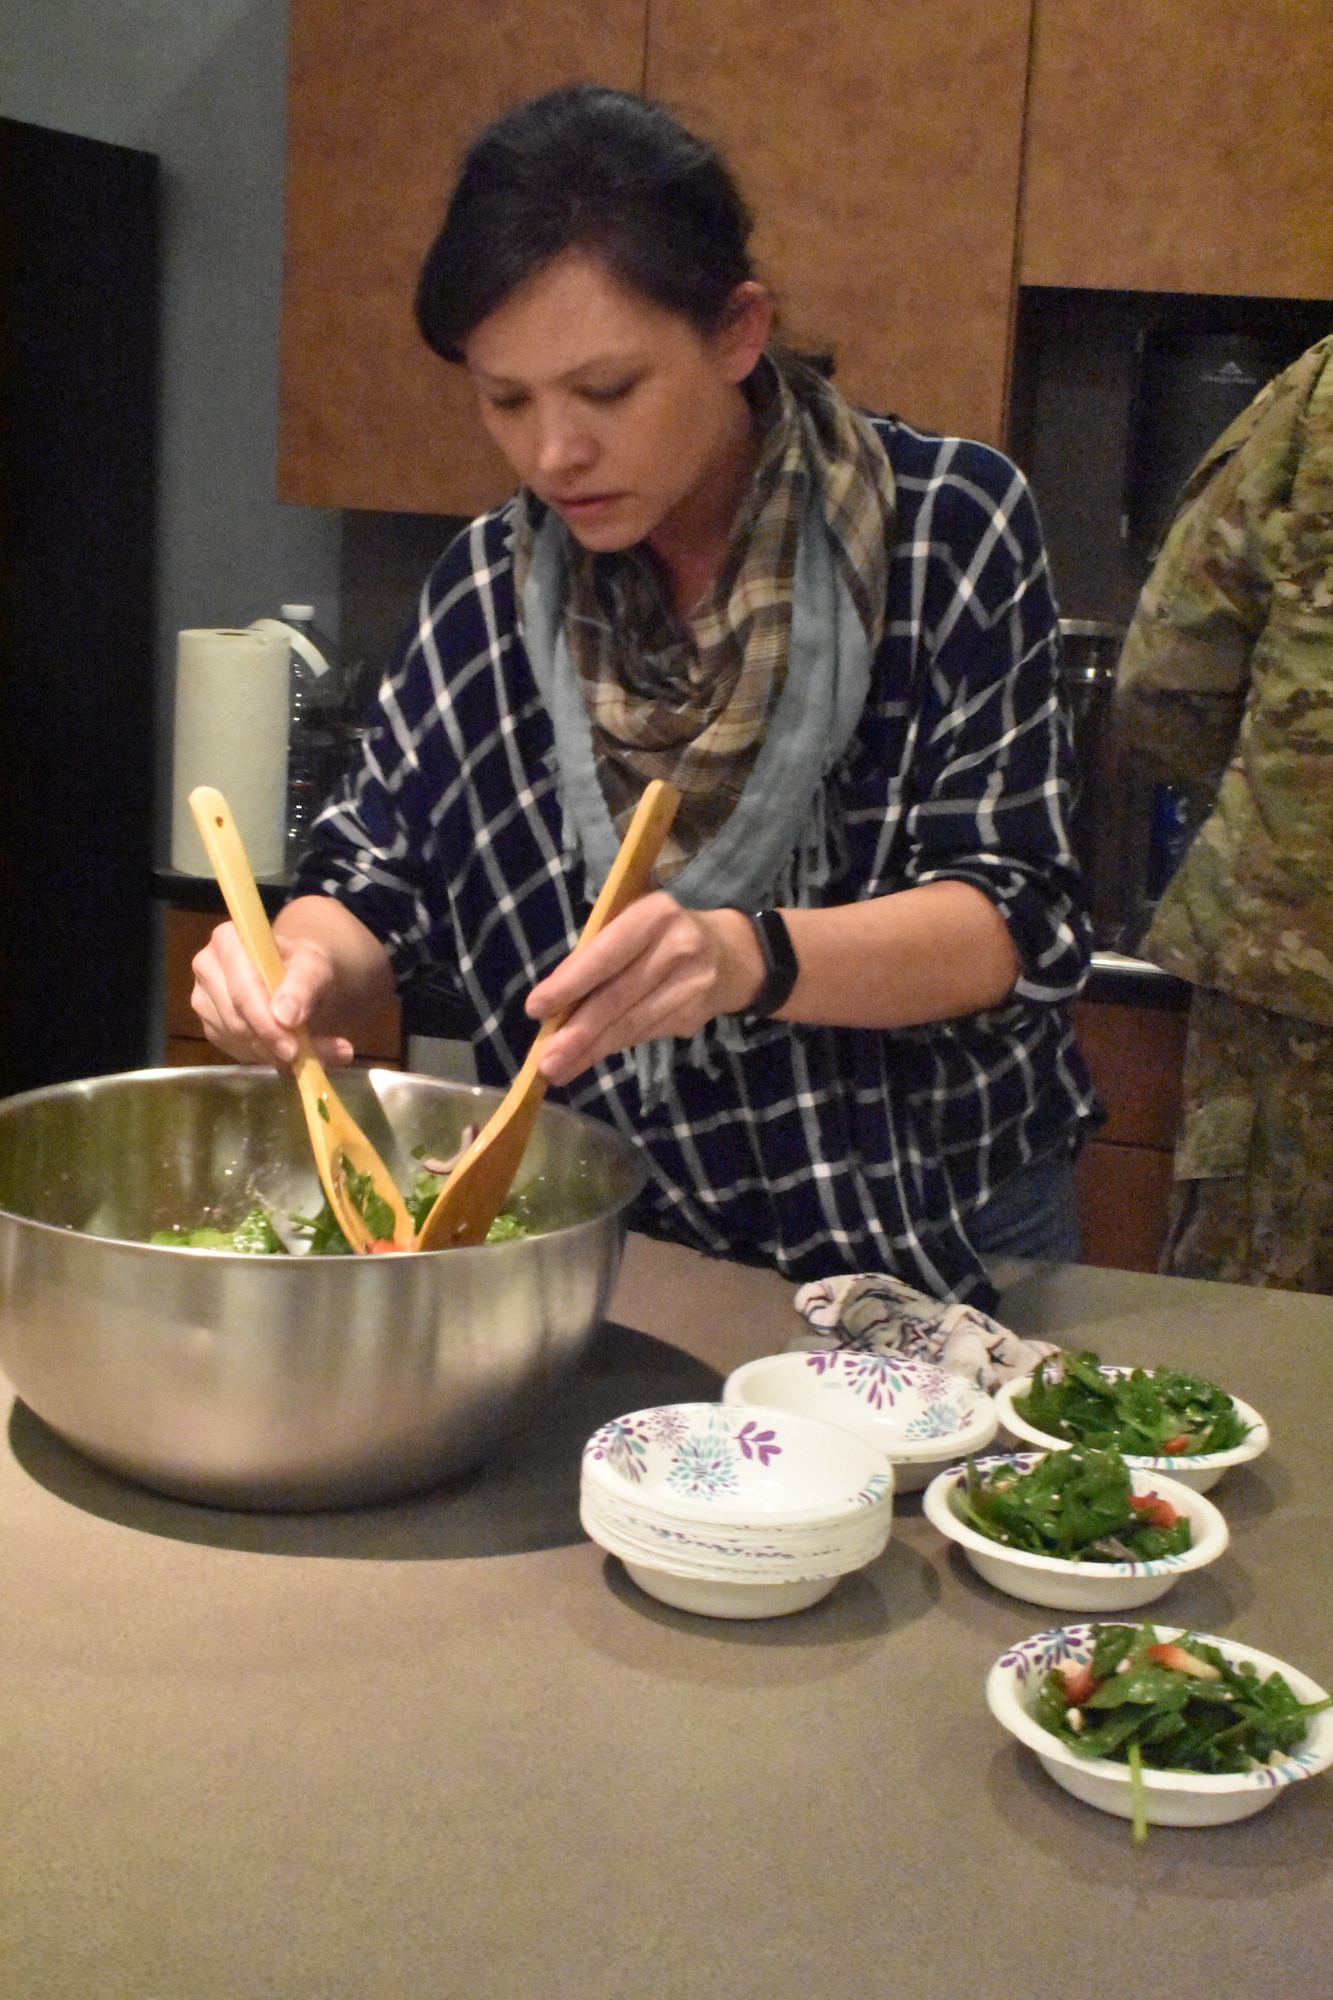 Yi Lynne Weber, Harvest Ridge Winery chef, tosses a salad Feb. 13, 2019, at Dover Air Force Base, Del. Weber participated as a guest chef for Dorm to Gourm: a base continuing education program that partners with local chefs to develop and equip Airmen with cooking skills to take care of themselves and their families. (U.S. Air Force photo by 2nd Lt. Lorraine Cho)